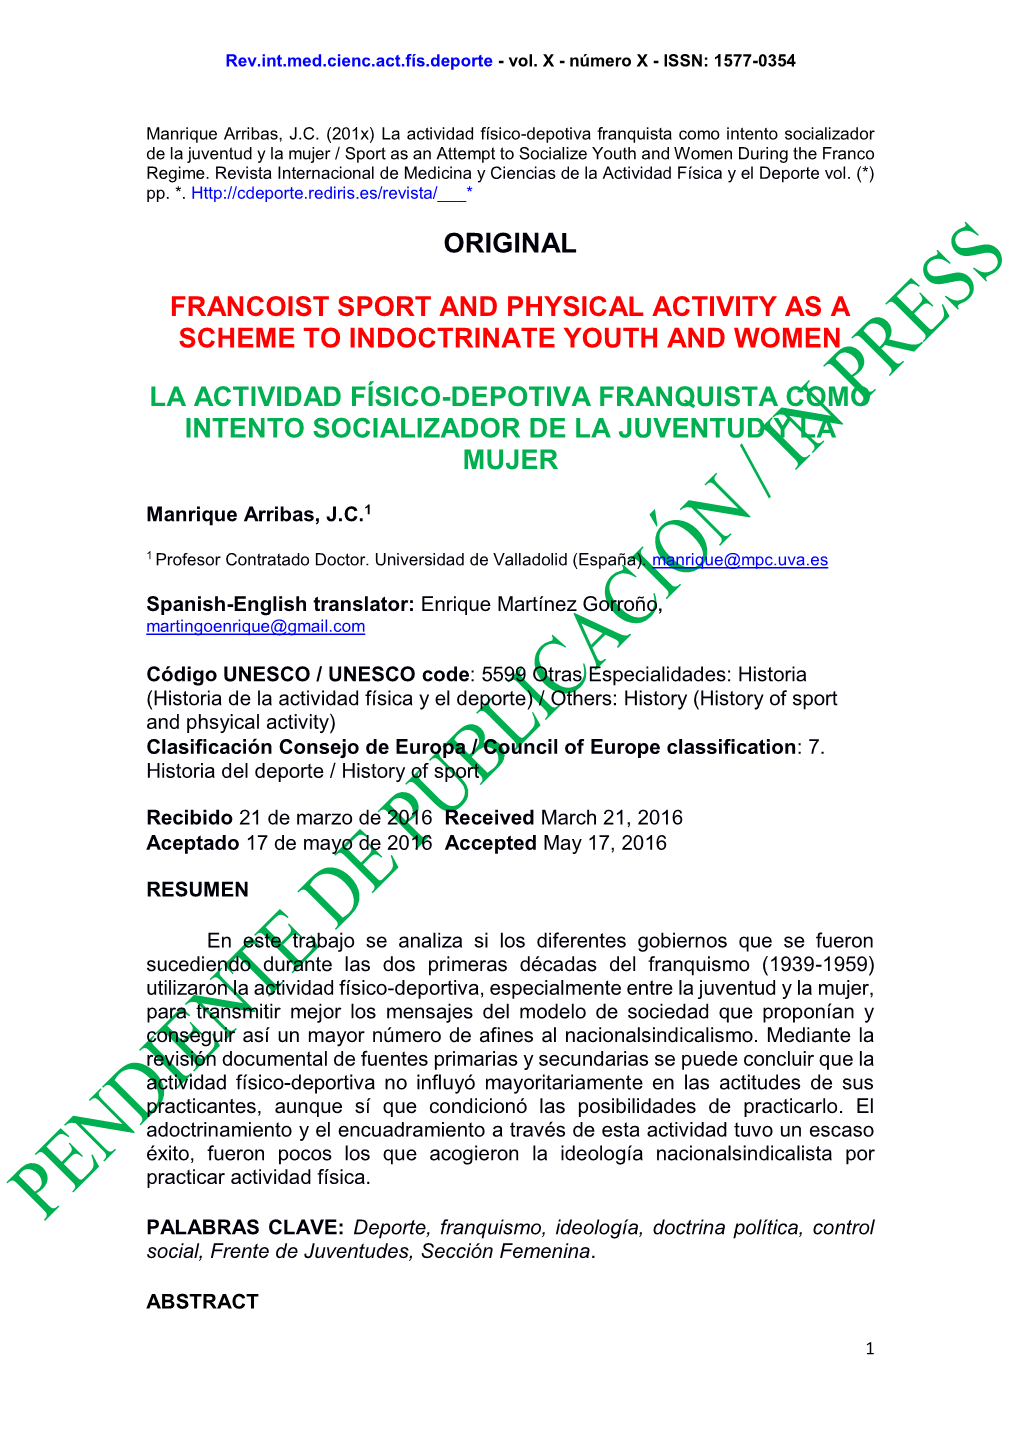 Original Francoist Sport and Physical Activity As A